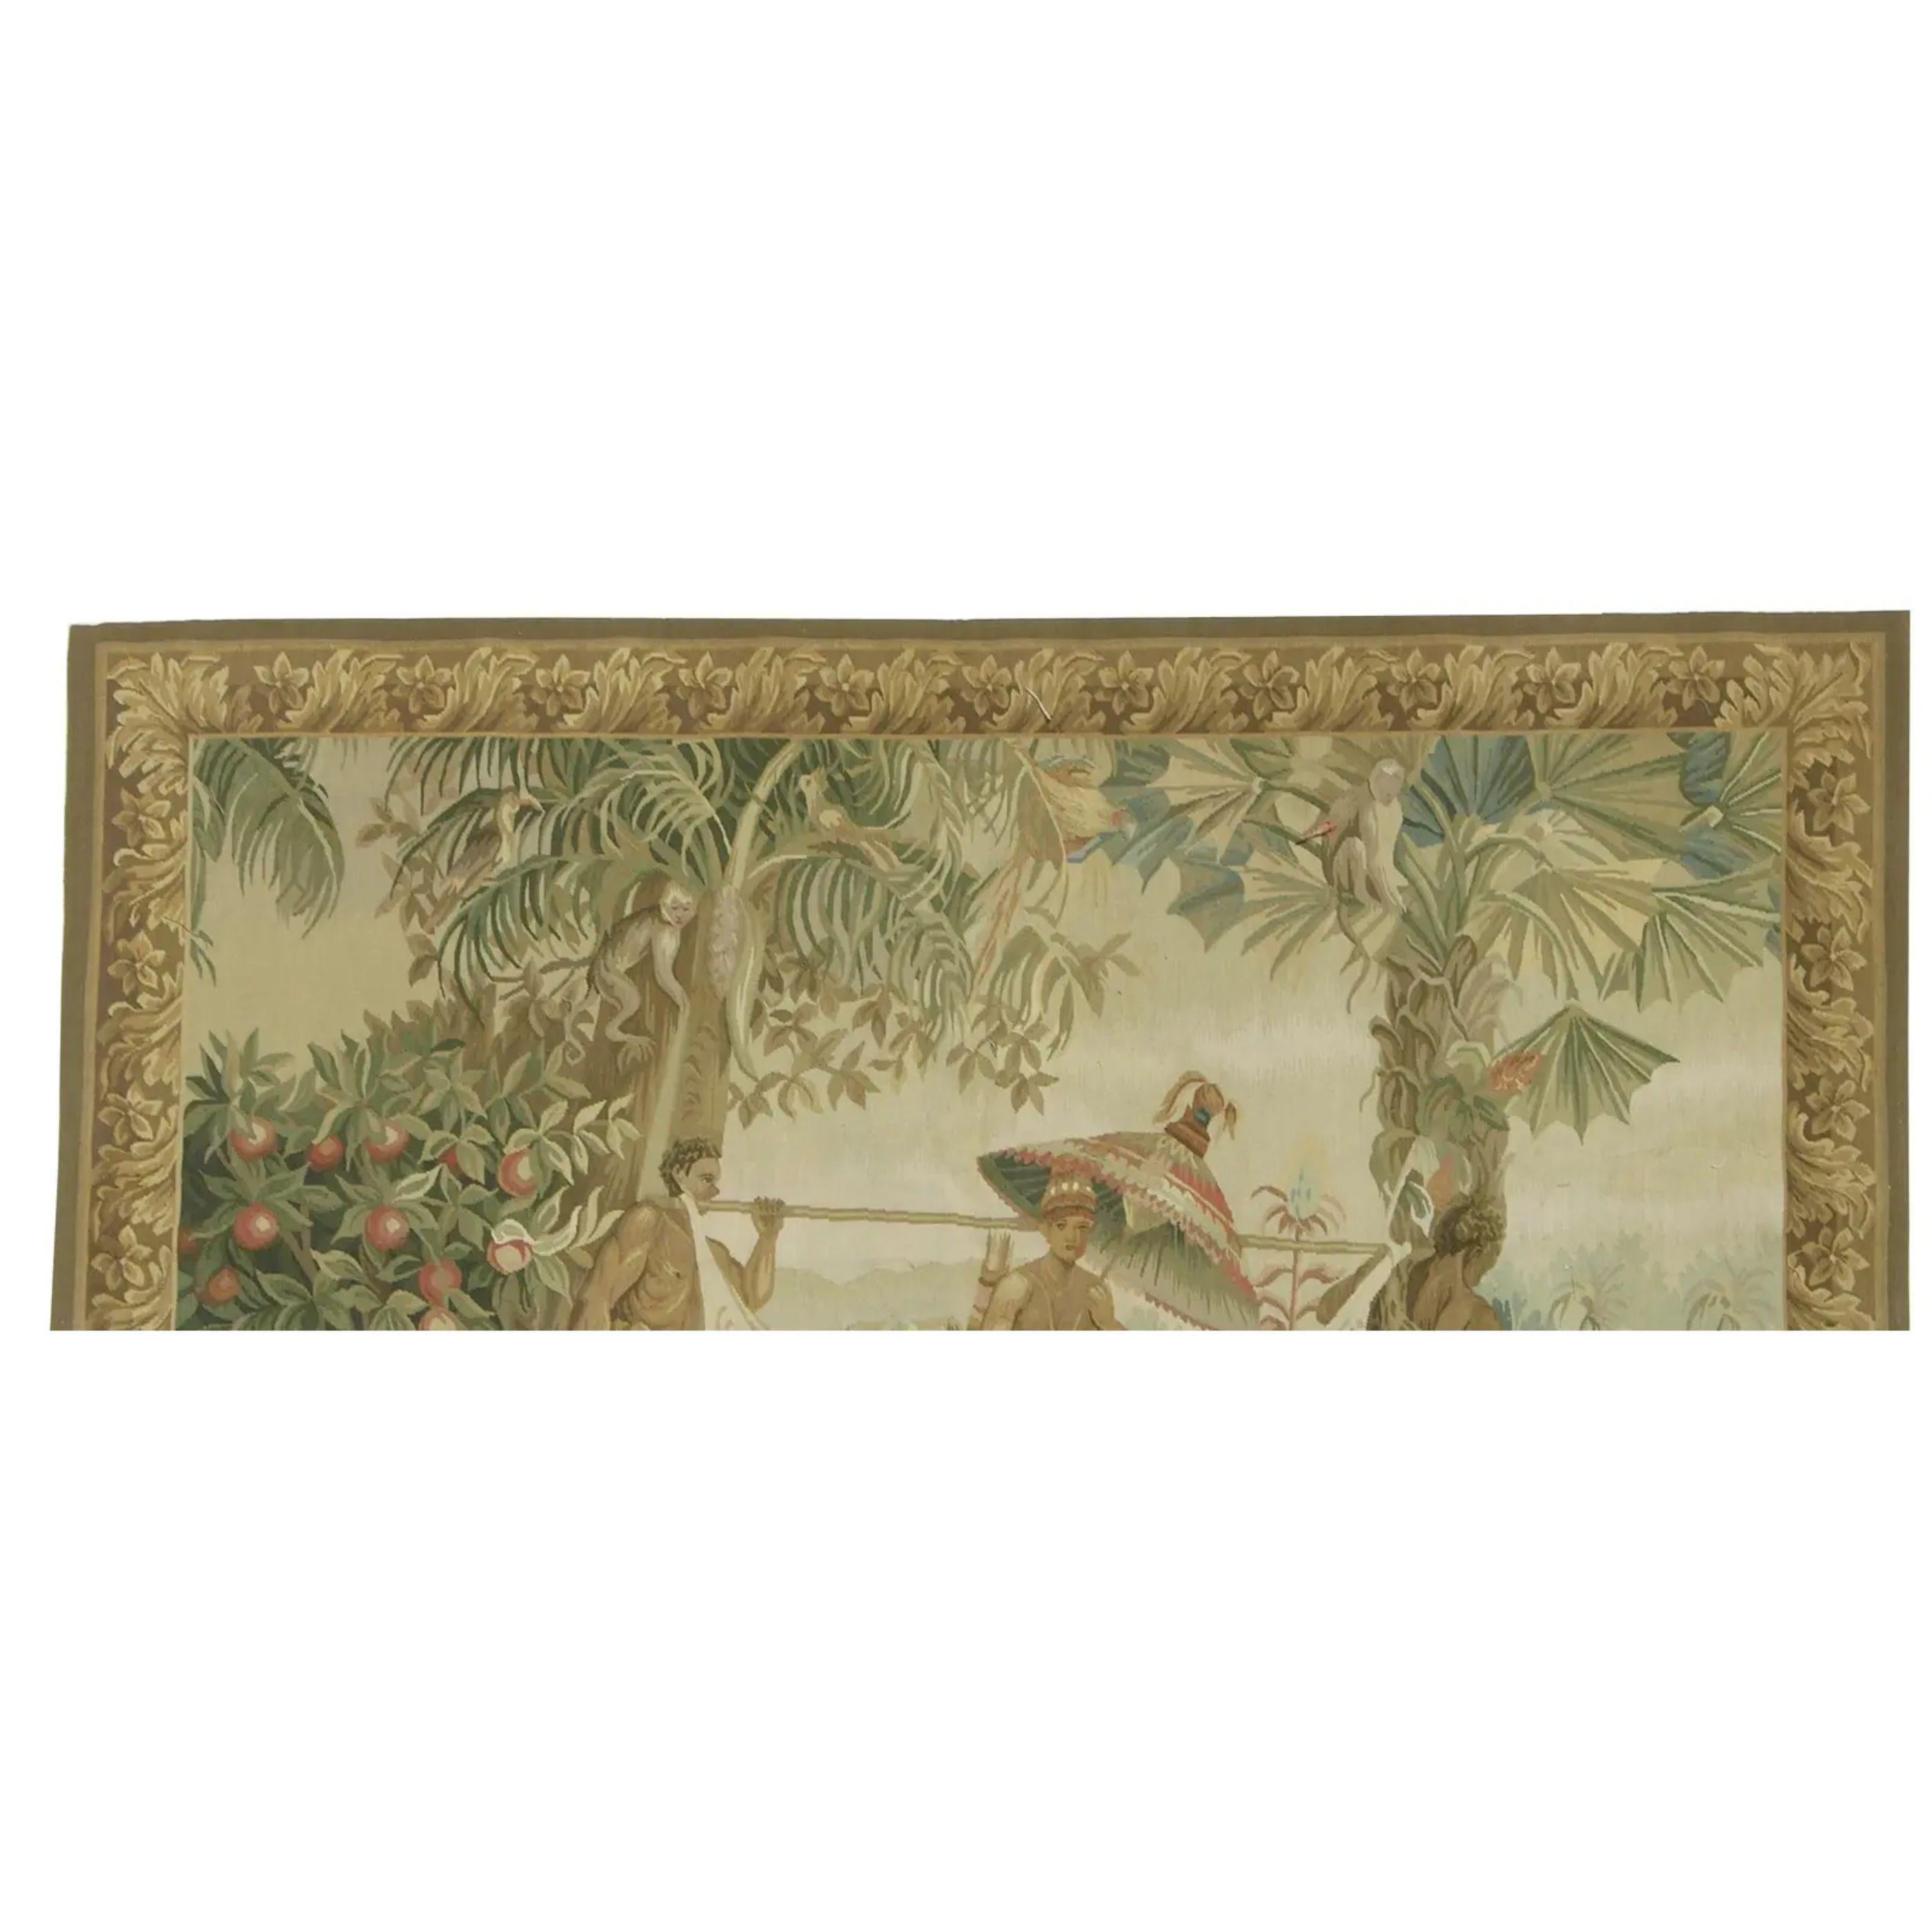 Unknown Vintage Tapestry Depicting Royalty 5.7X4 For Sale